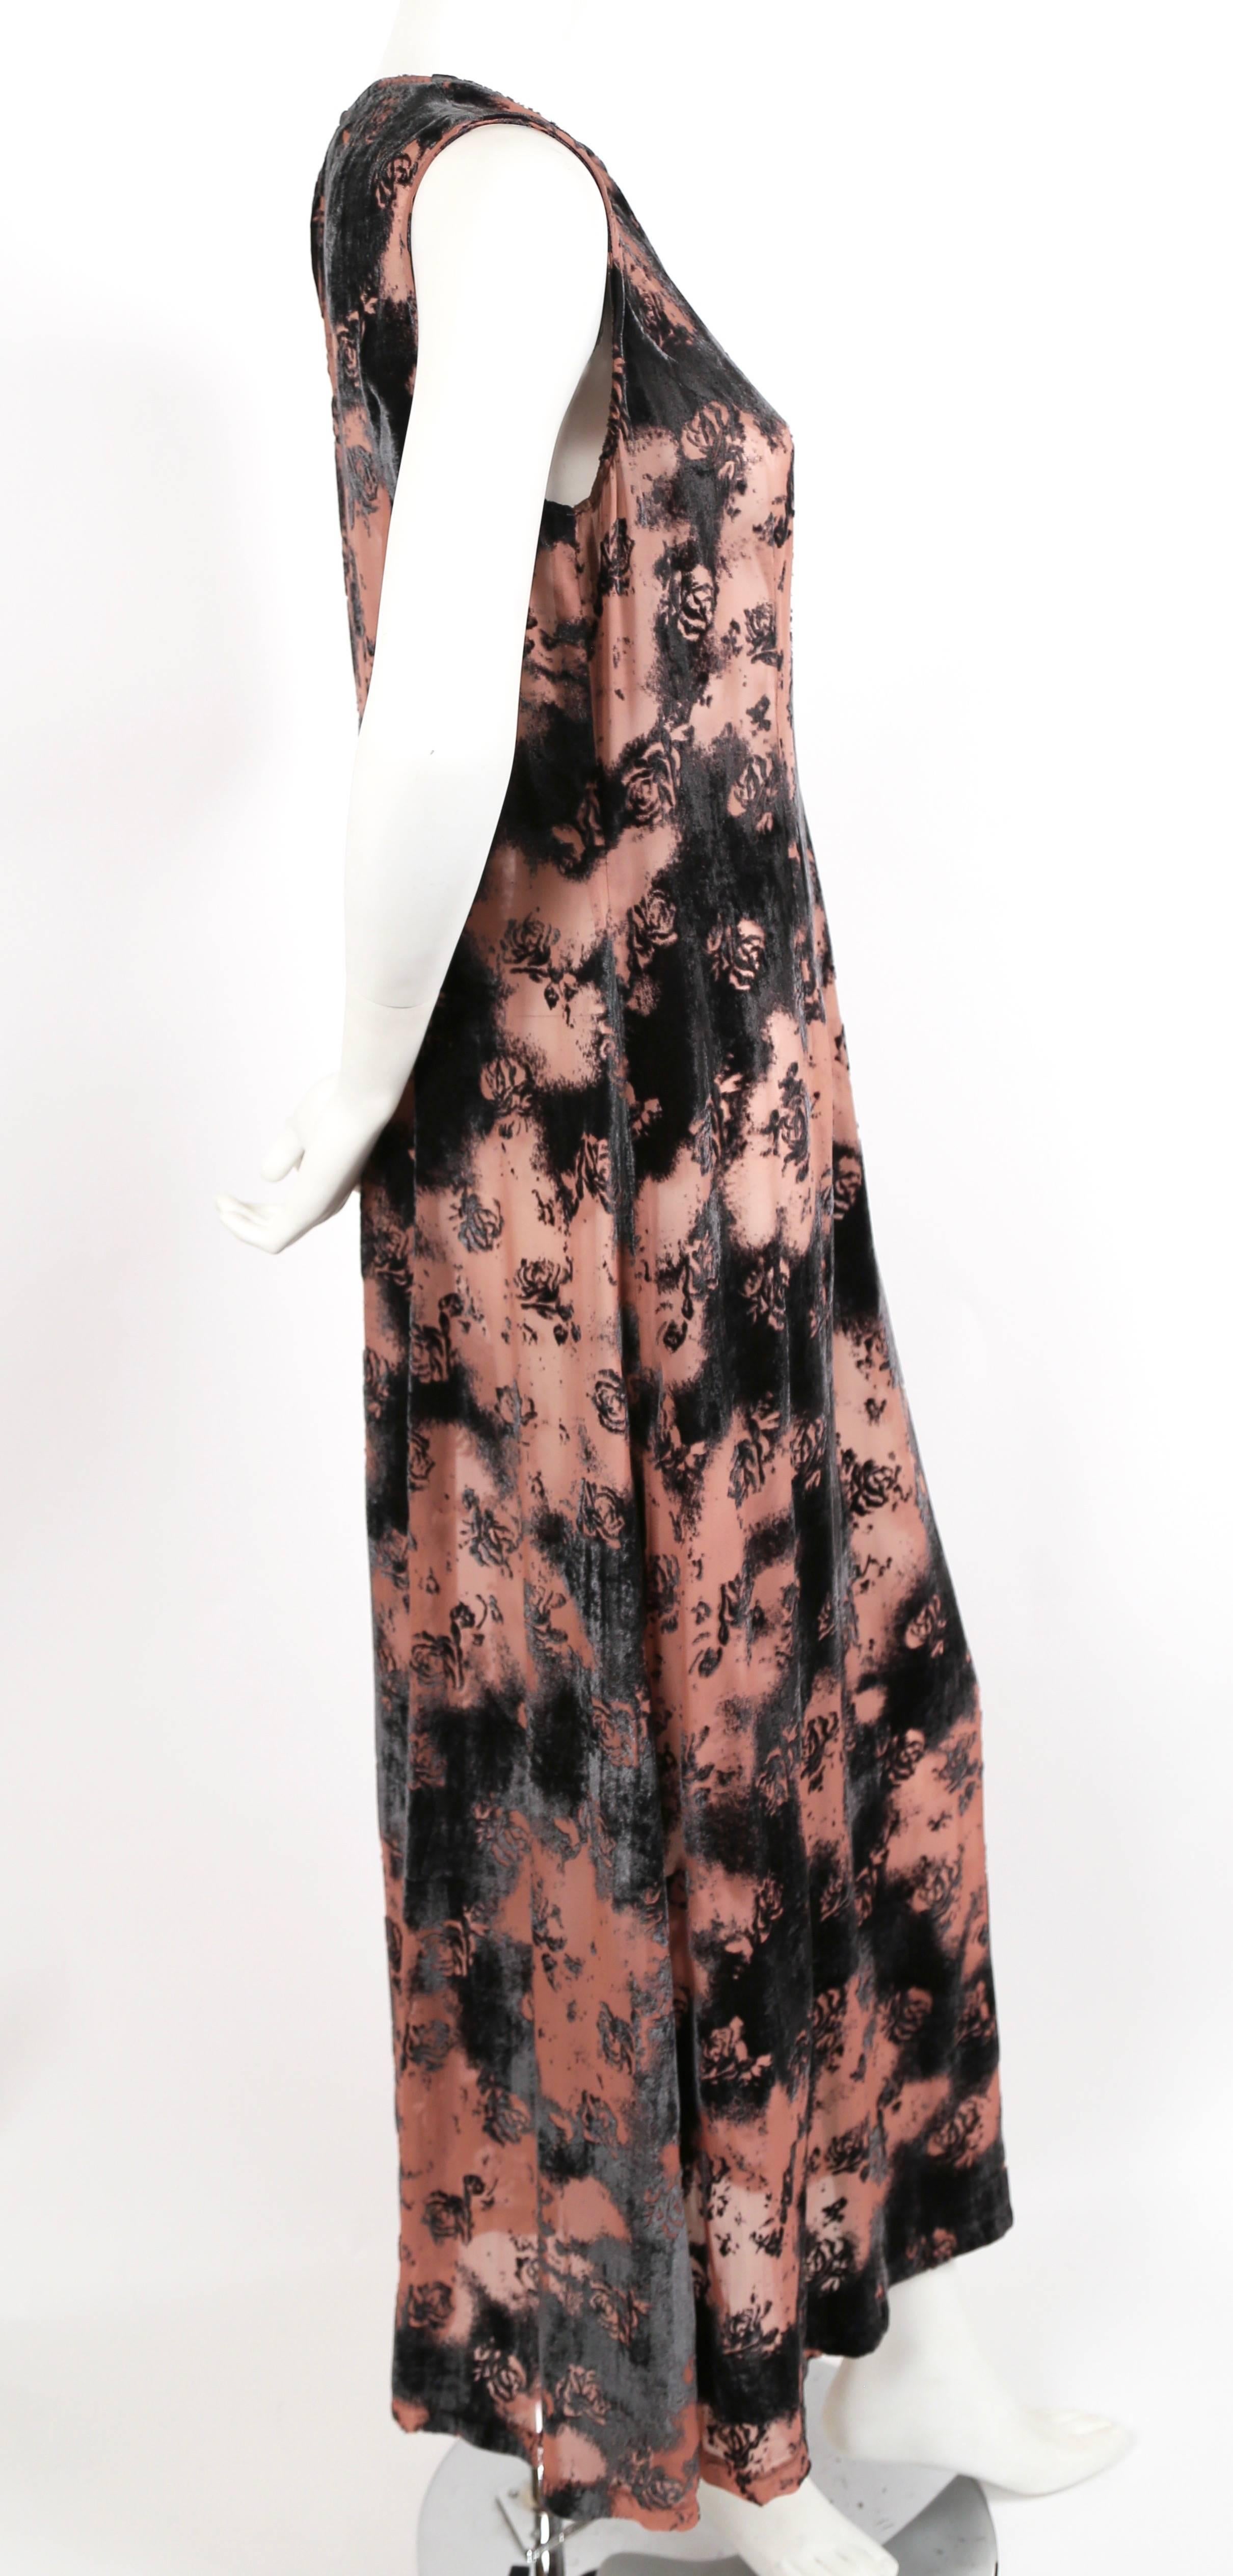 Soft pink and black velvet maxi semi-sheer dress designed by Ann Demeulemeester dating to the 1990's. Belgian size 38 which best fits a US 4 or 6. Approximate measurements: bust 36